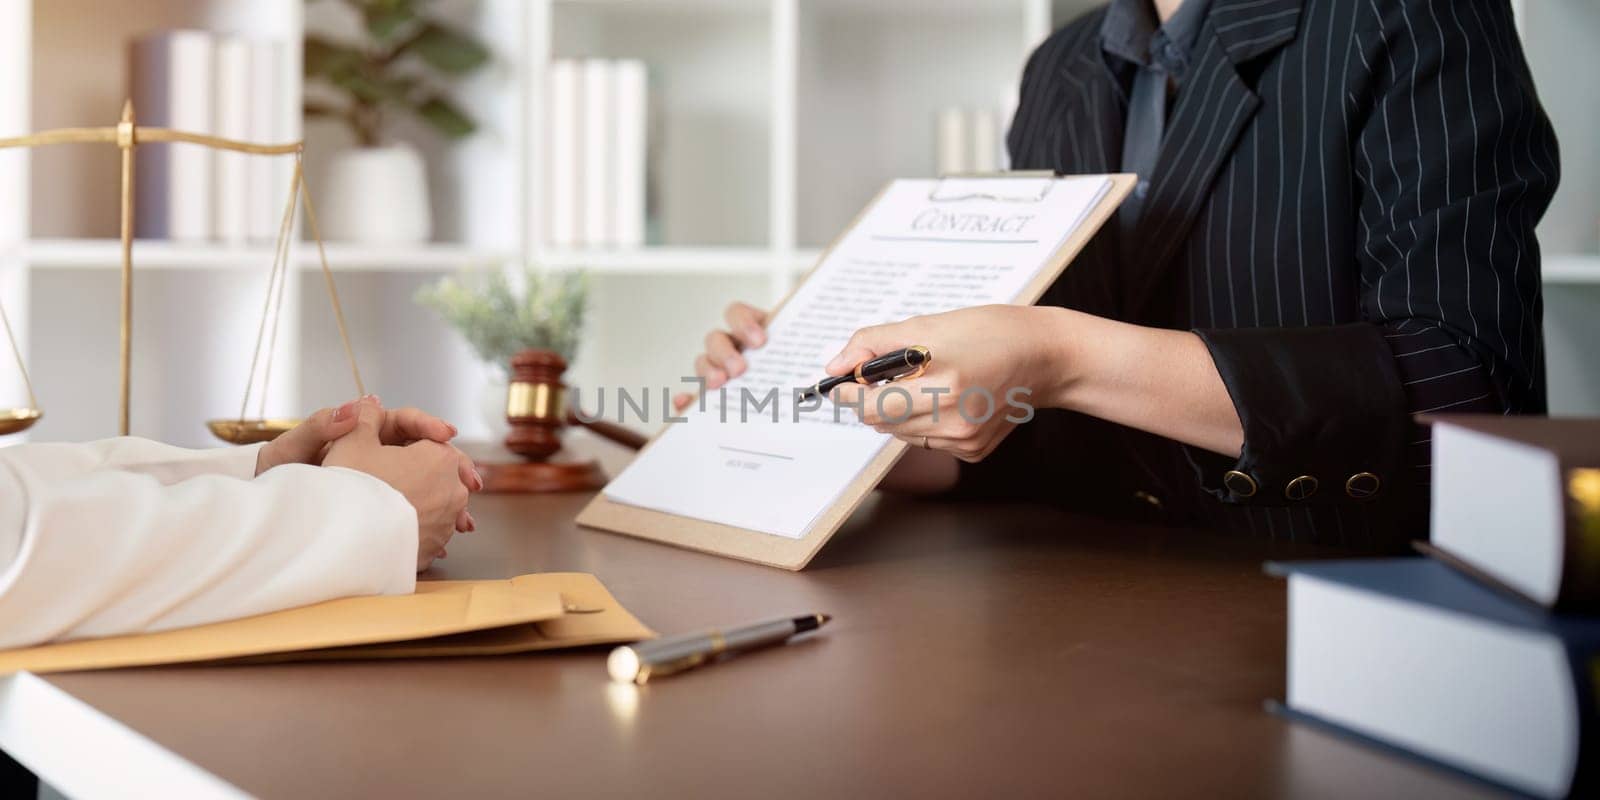 Lawyer office the company hired the lawyer office a legal advisor and draft the contract so that the client could signs contract. Contract of sale was on the table in the lawyer office.